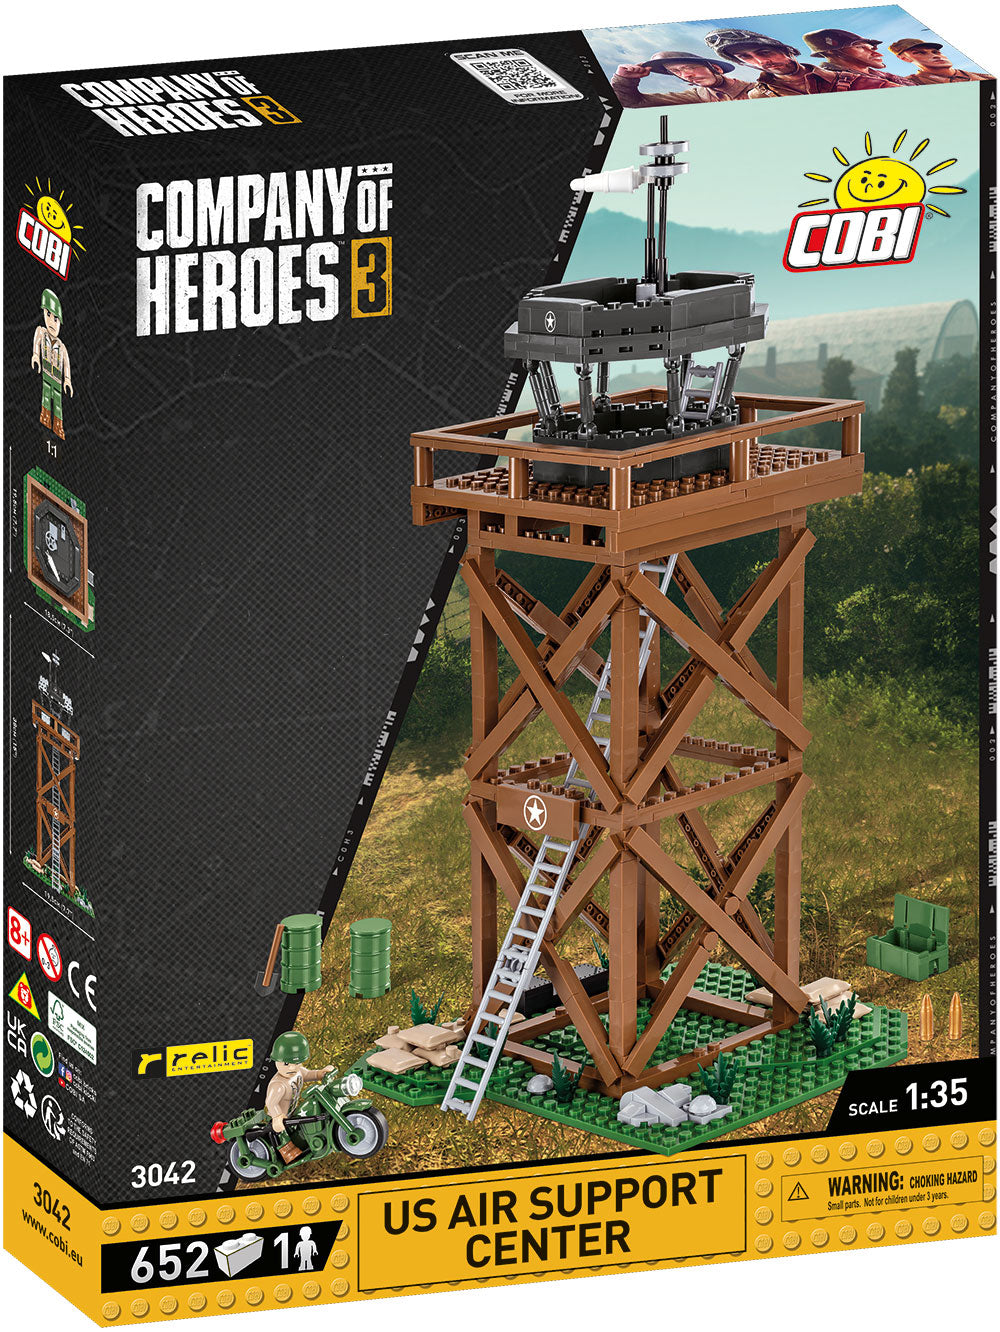 COBI Company of Heroes 3 US Air Support Center